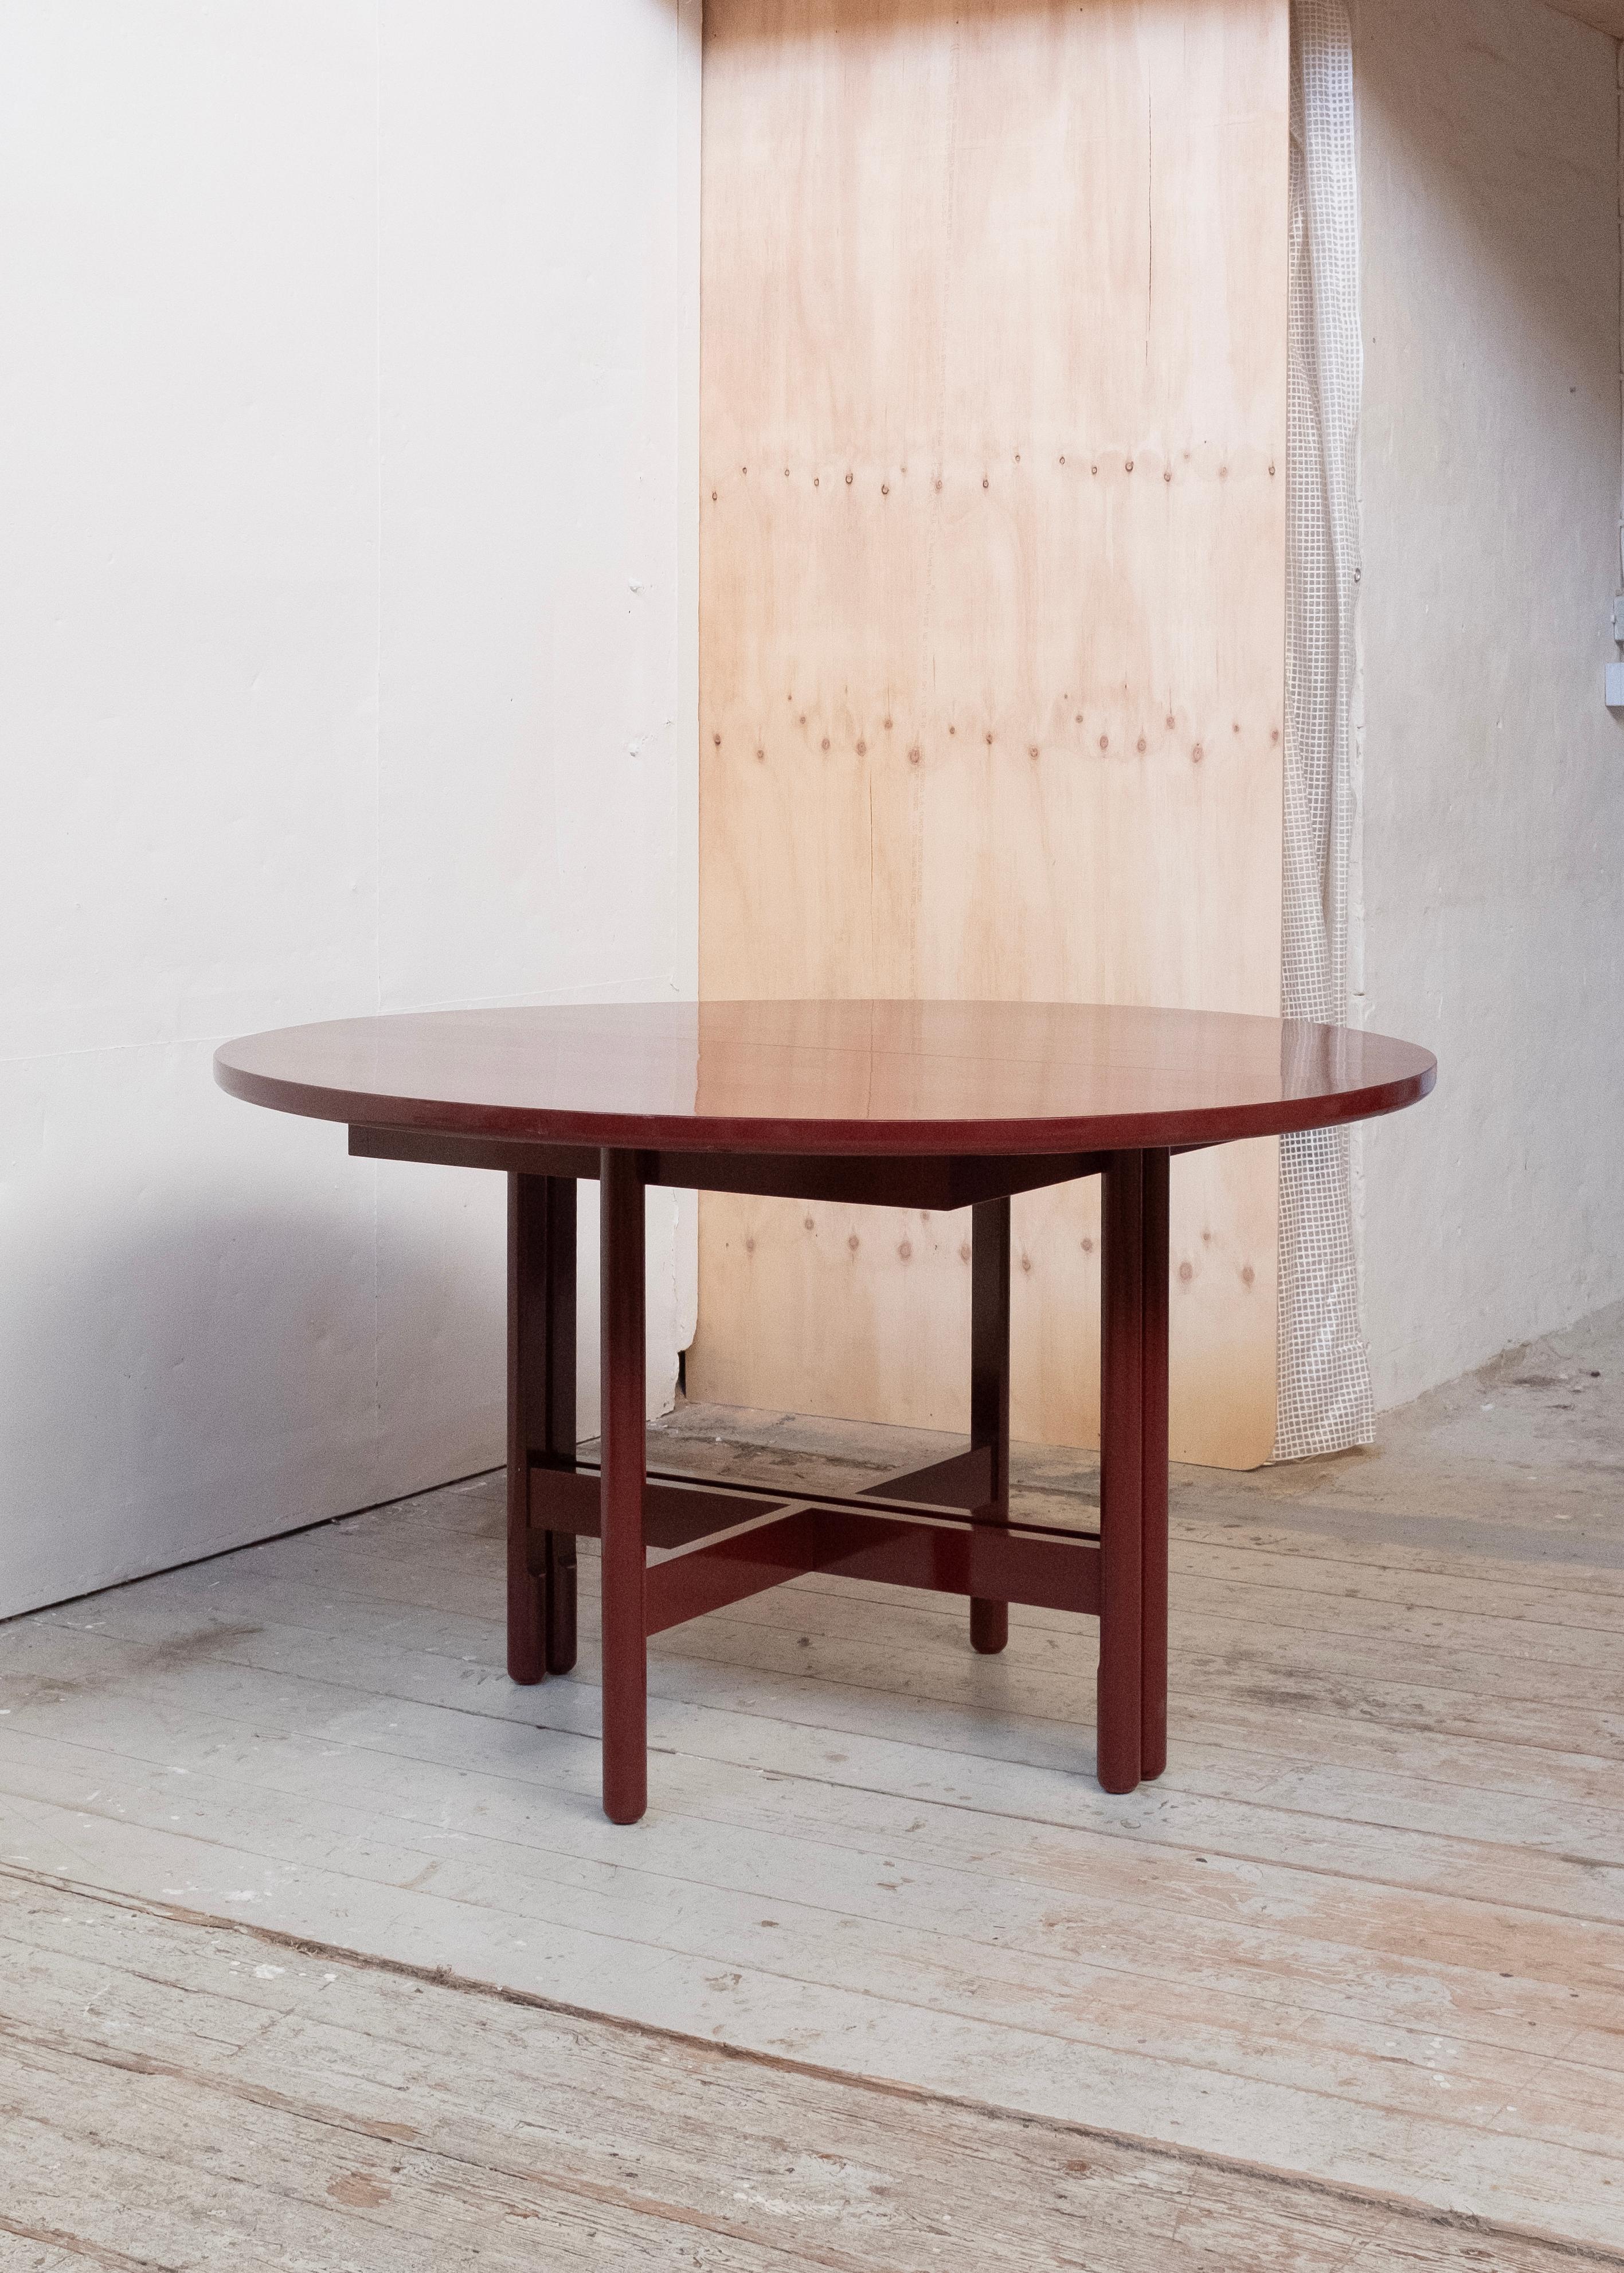 Modern Handmade Thea Dining Table, Extendable Ø130cm - Painted Oak - by BACD studio For Sale